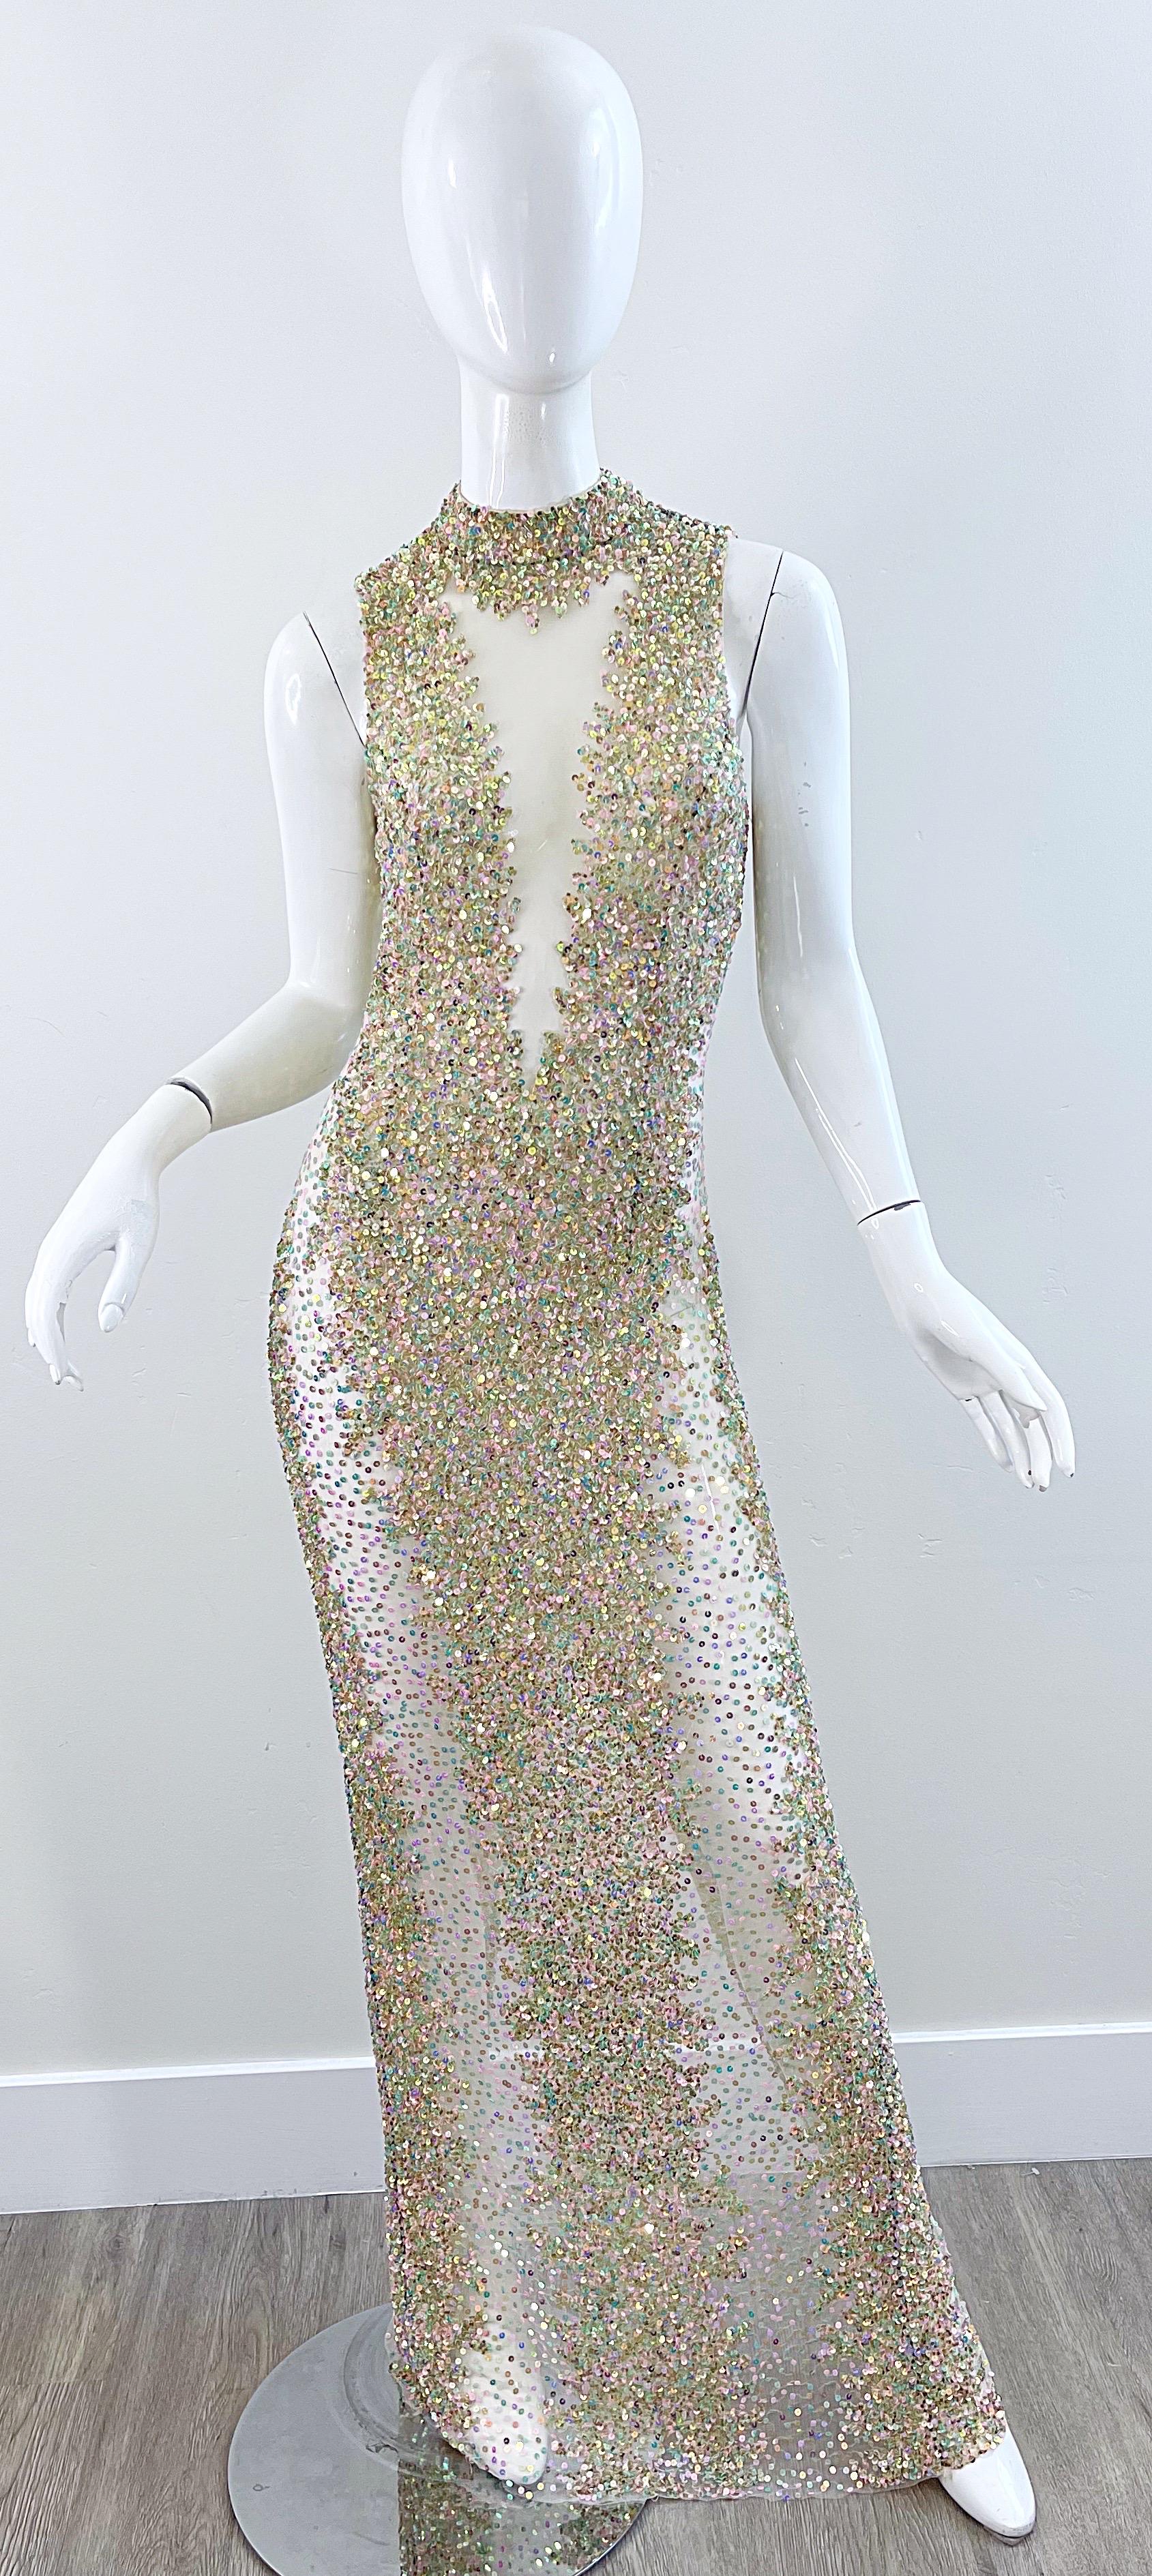 Beautiful 1990s iridescent sequined sheer mesh gown! Features thousands of hand-sewn sequins that are strategically placed for coverage. Hidden zipper up the back with hook-and-eye closure.
In great condition 
Made in USA
Approximately Size